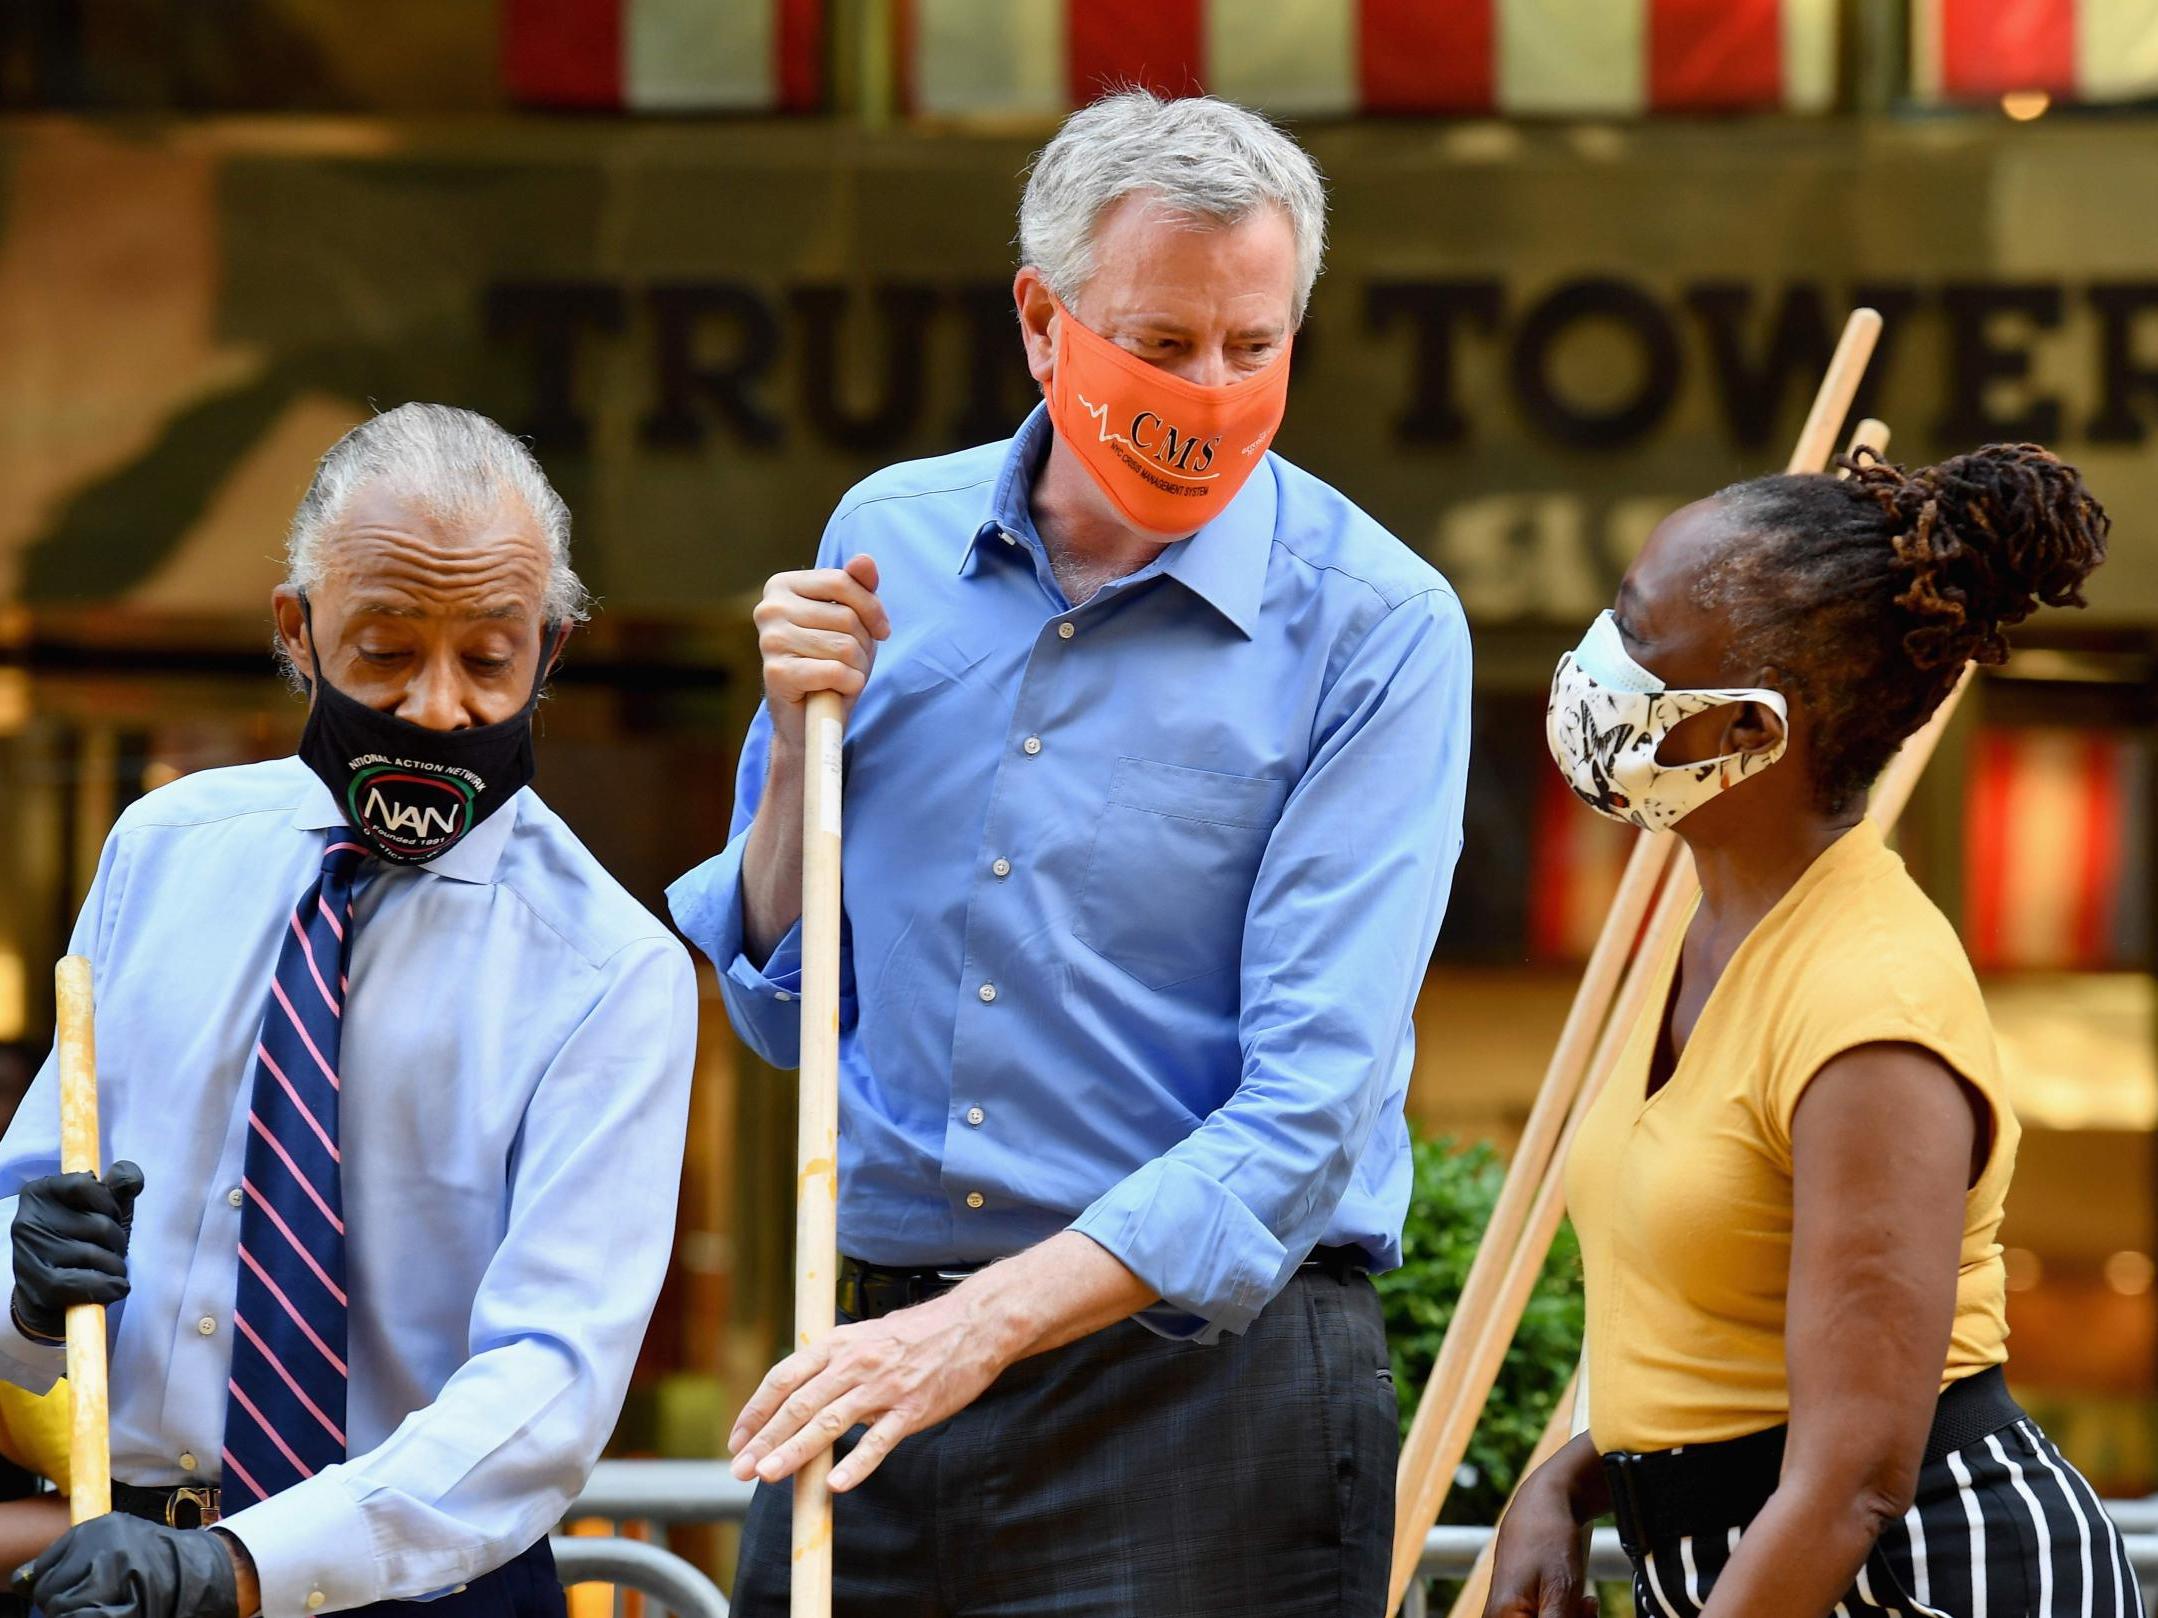 The Reverend Al Sharpton, New York Mayor Bill de Blasio and his wife Chirlane McCray, paint a new Black Lives Matter mural outside of Trump Tower